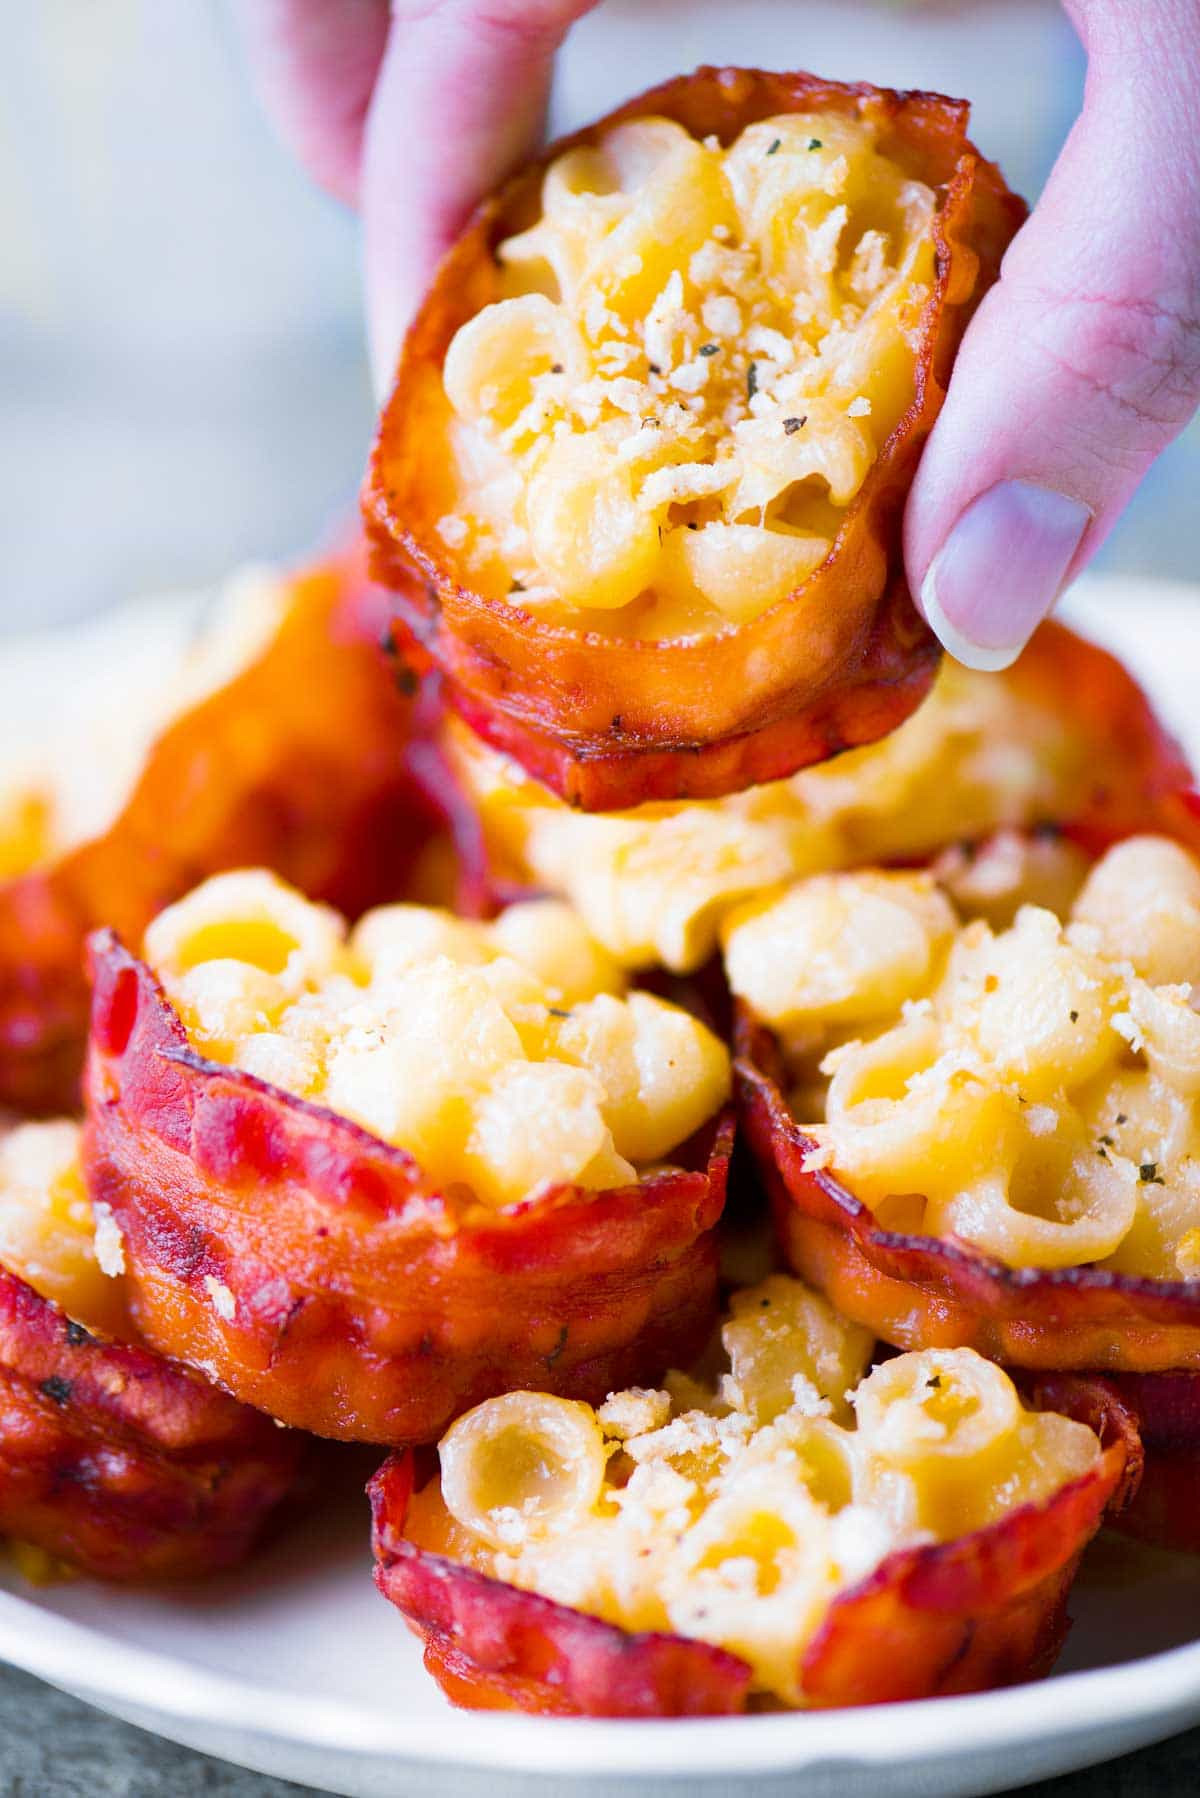 Mac And Cheese Recipes With Bacon
 Bacon Mac and Cheese Bites The Gunny Sack